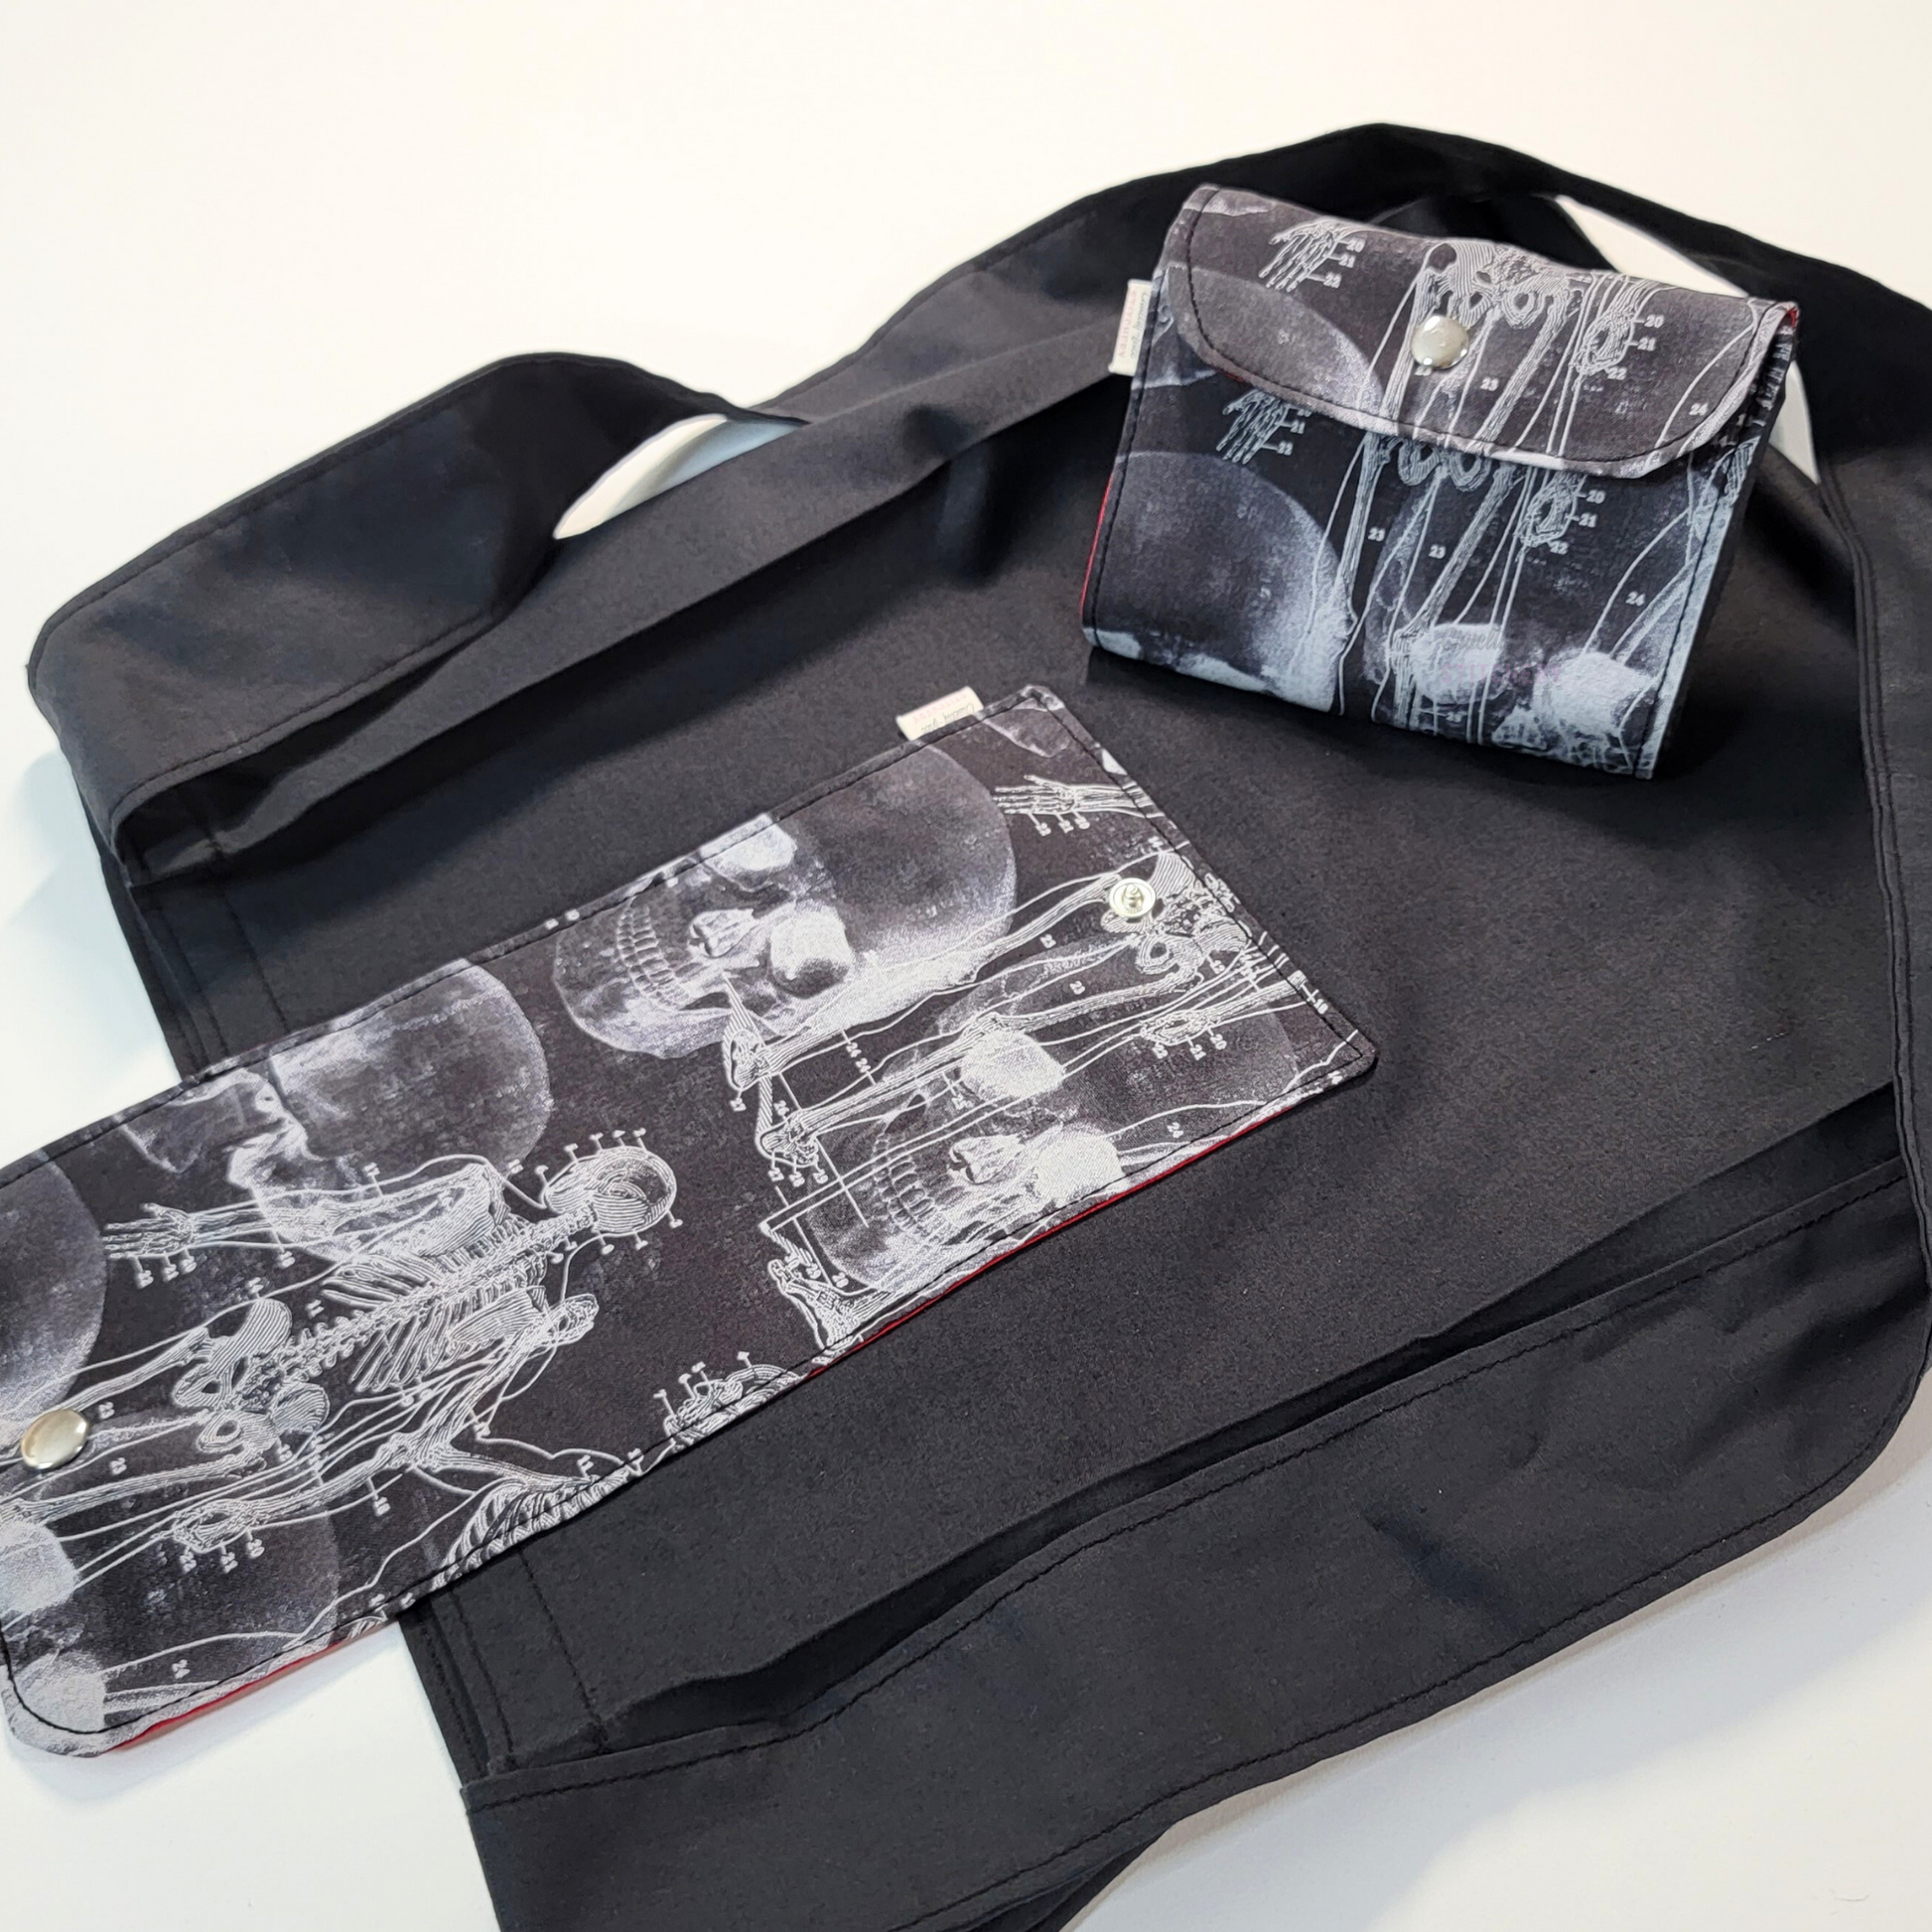 A solid black tote bag with a long strap and a black flap printed with x-ray images of a skull and skeleton. On top of the bag is another bag that has been folded up and snapped together like a wallet.